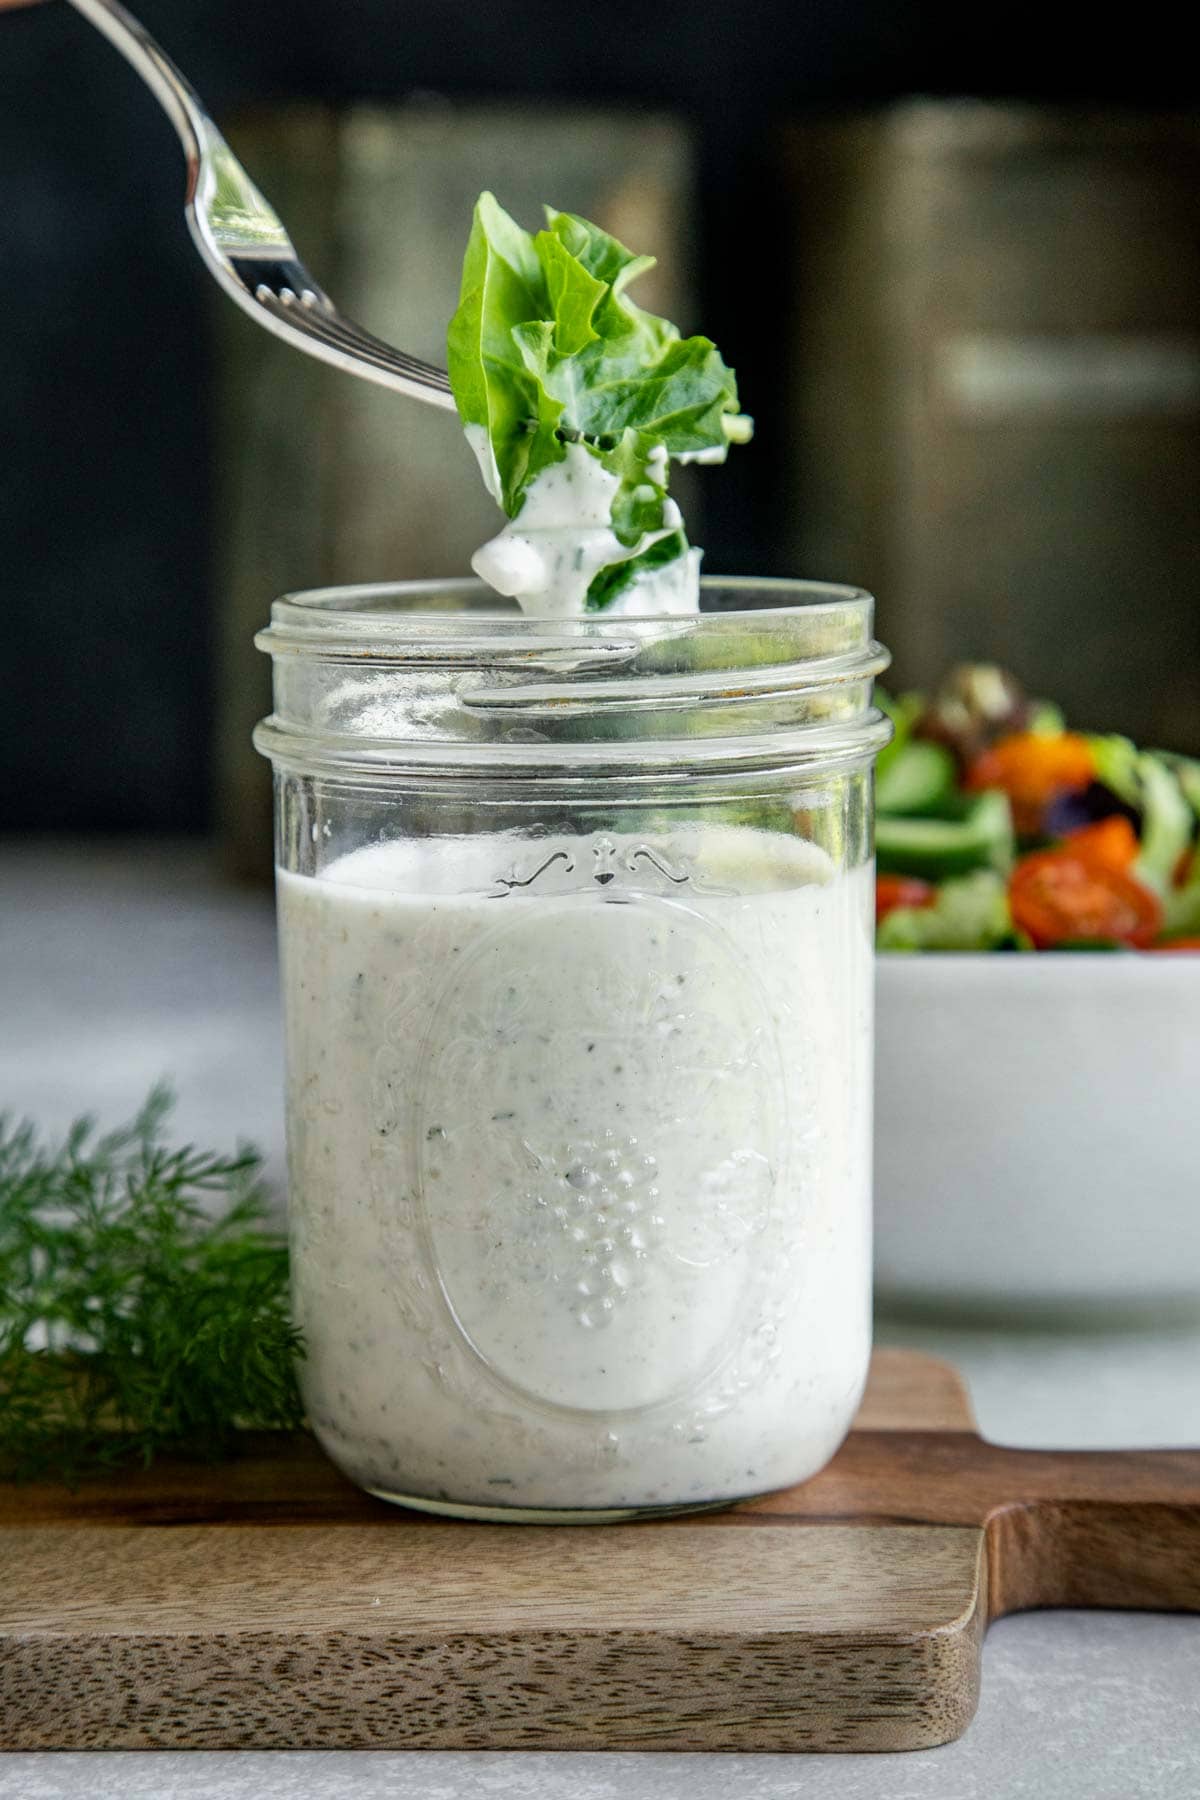 a fork dipping lettuce into a jar of ranch